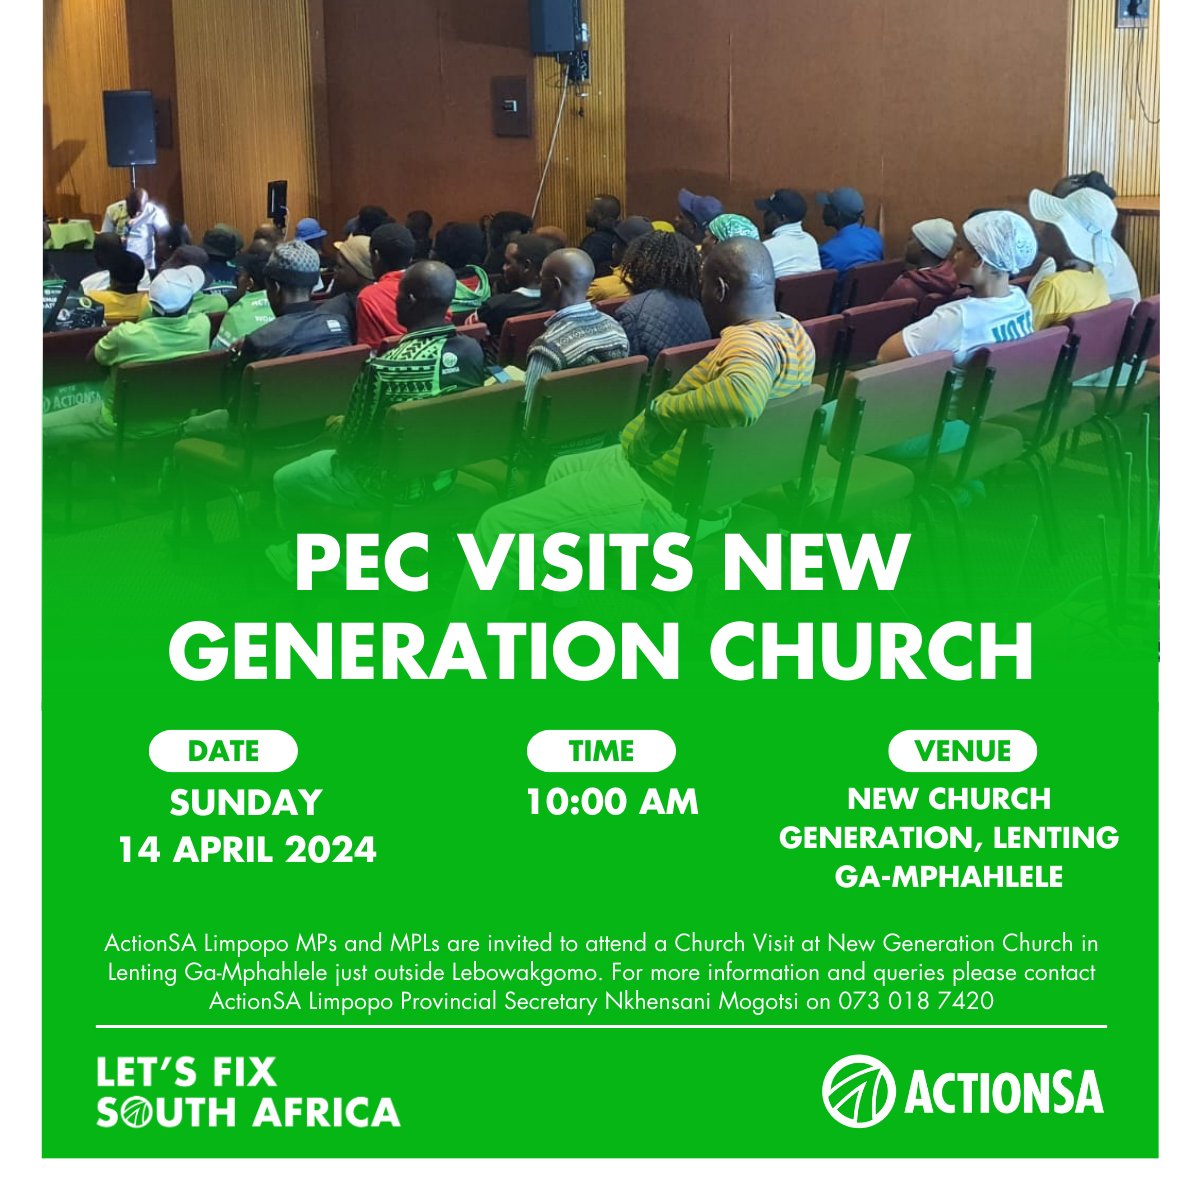 Tommorow I will be with @Action4SA Limpopo PEC members, MPs and MPLs candidates attending a church service at New Generation Church in Lenting, Ga-Mphahlele. Service starts at 10:00 AM @Action4SA @HermanMashaba @ME_Beaumont #TeamFixSA #LetsFixSA #GeneralElections2024